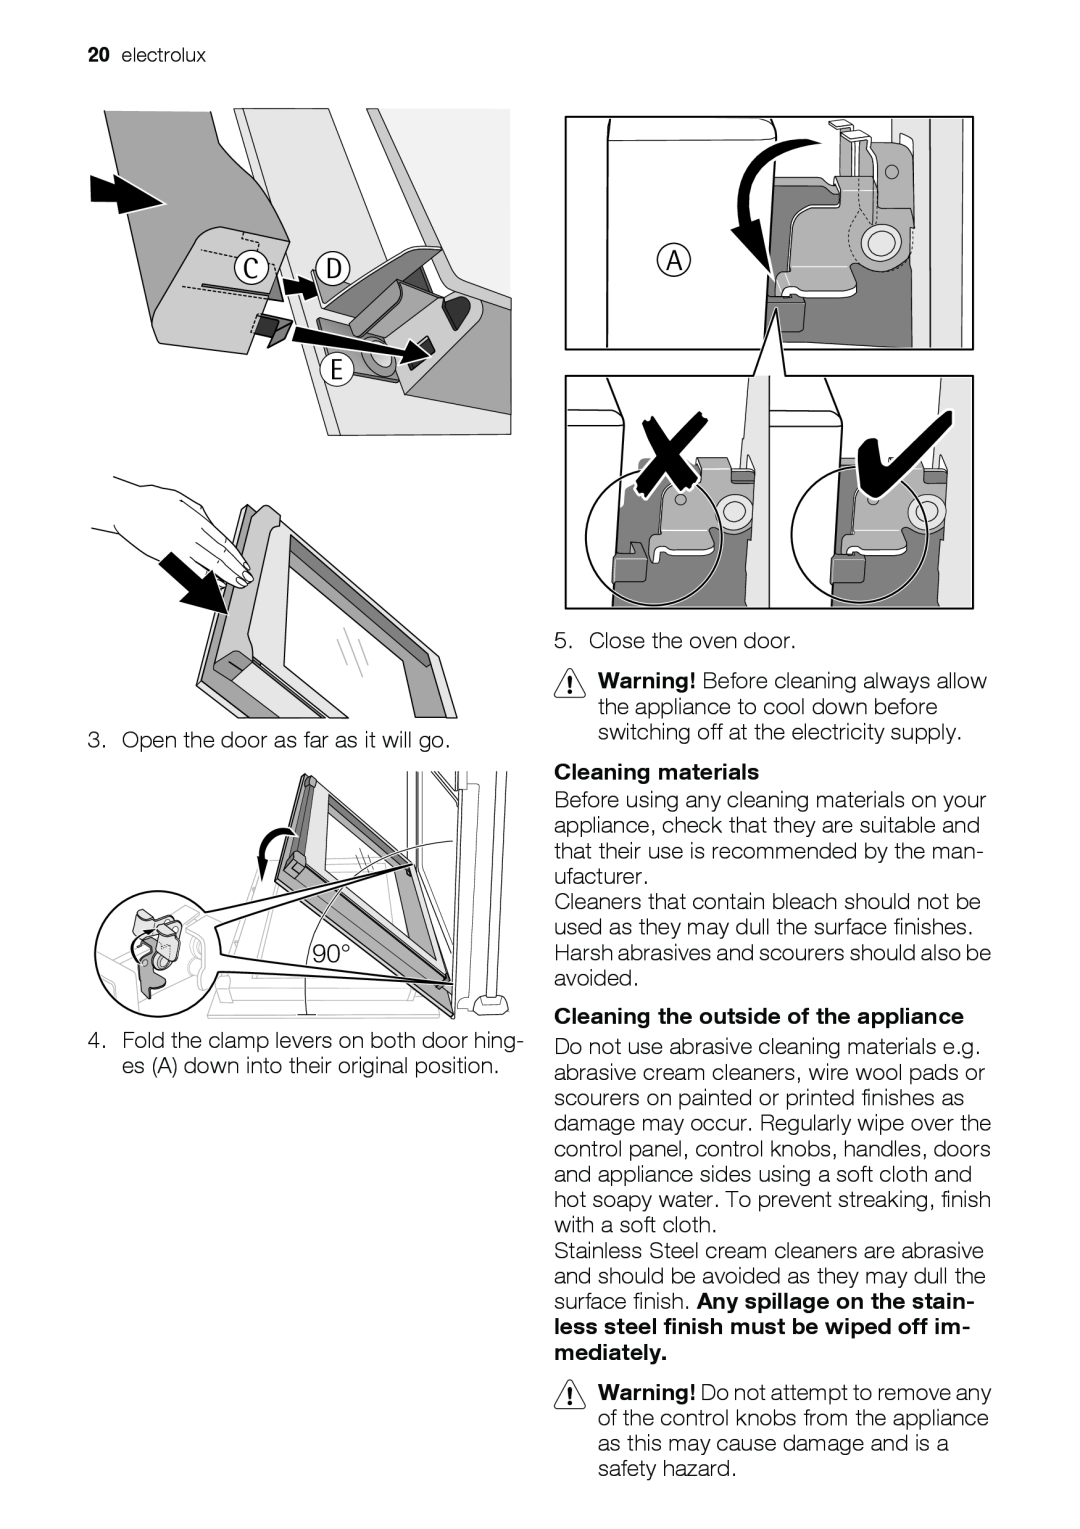 Electrolux EOD43103 user manual Cleaning materials, Cleaning the outside of the appliance, C D E 